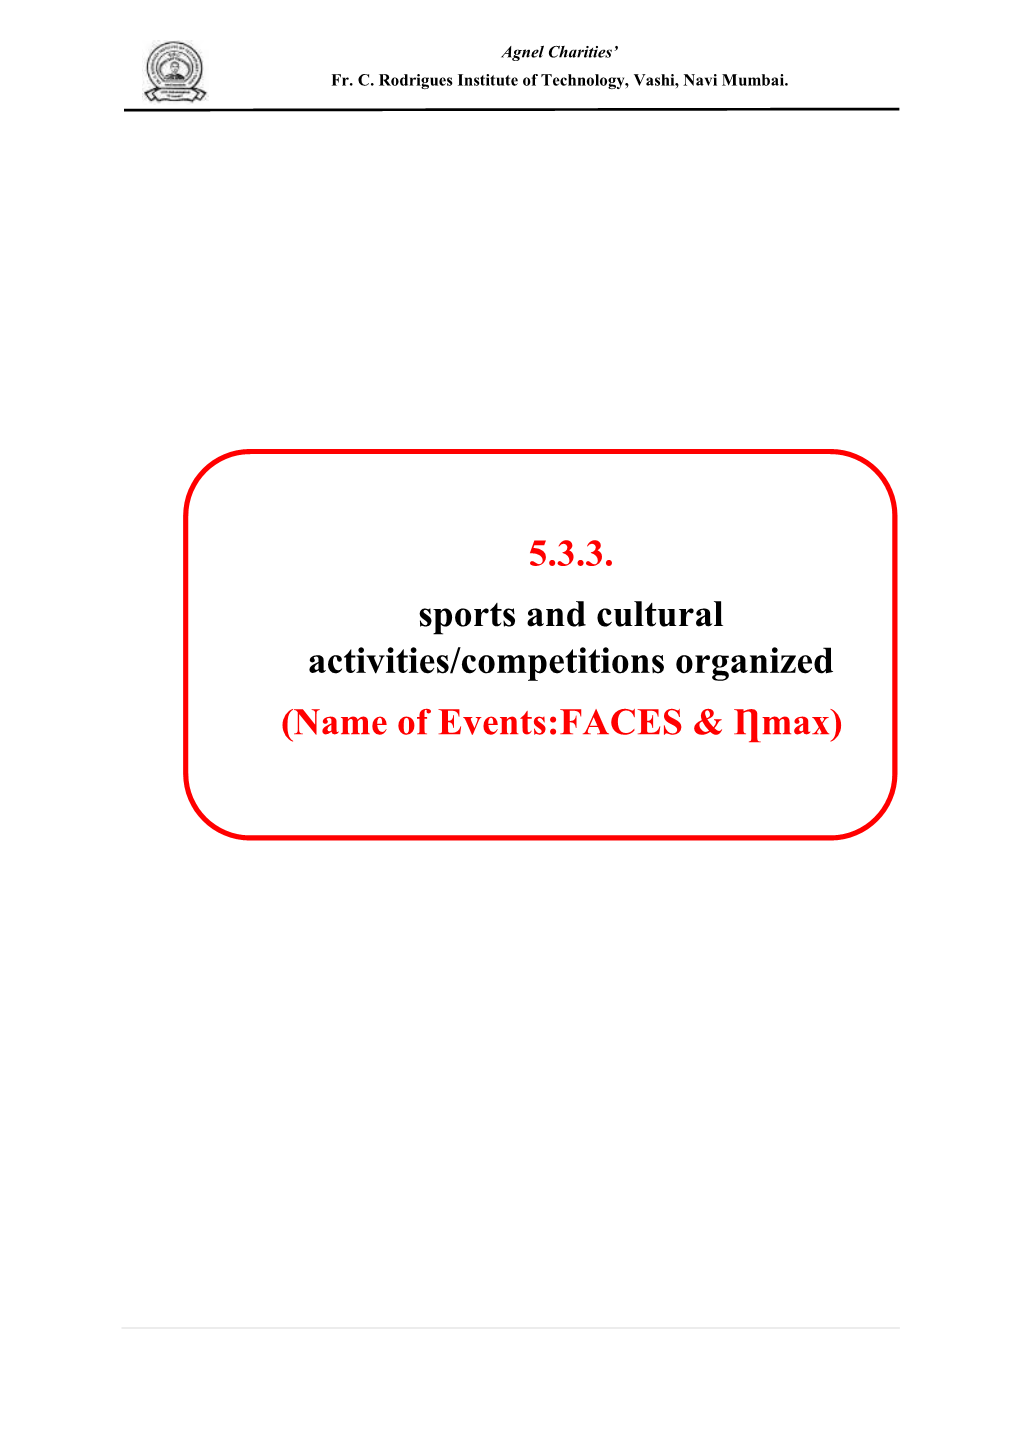 5.3.3. Sports and Cultural Activities/Competitions Organized